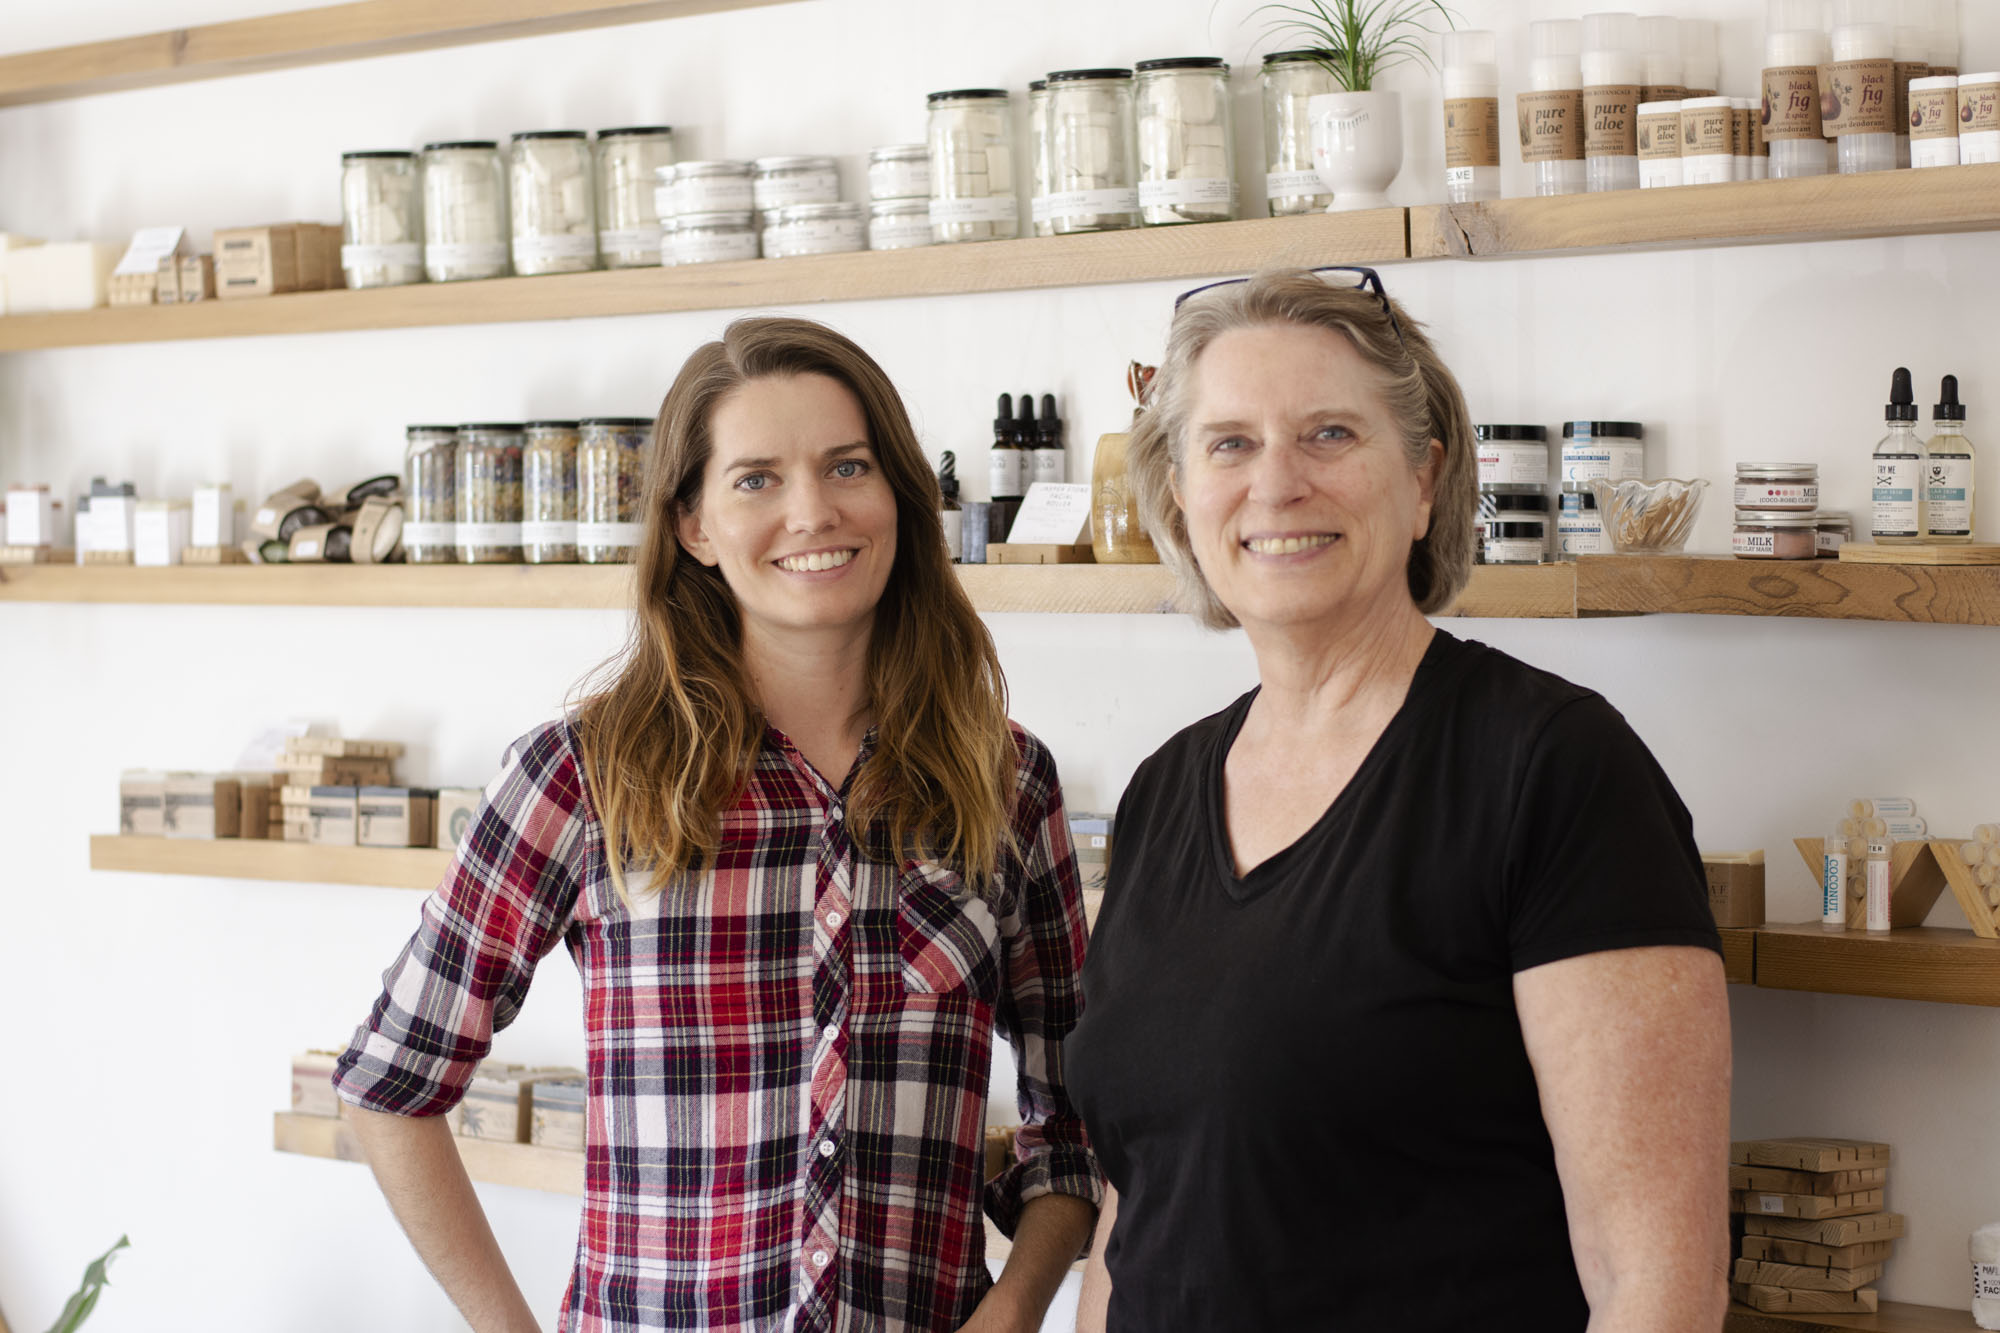 A photo of Callie and Sandee, co-founders of the zero waste lifestyle brand No Tox Life